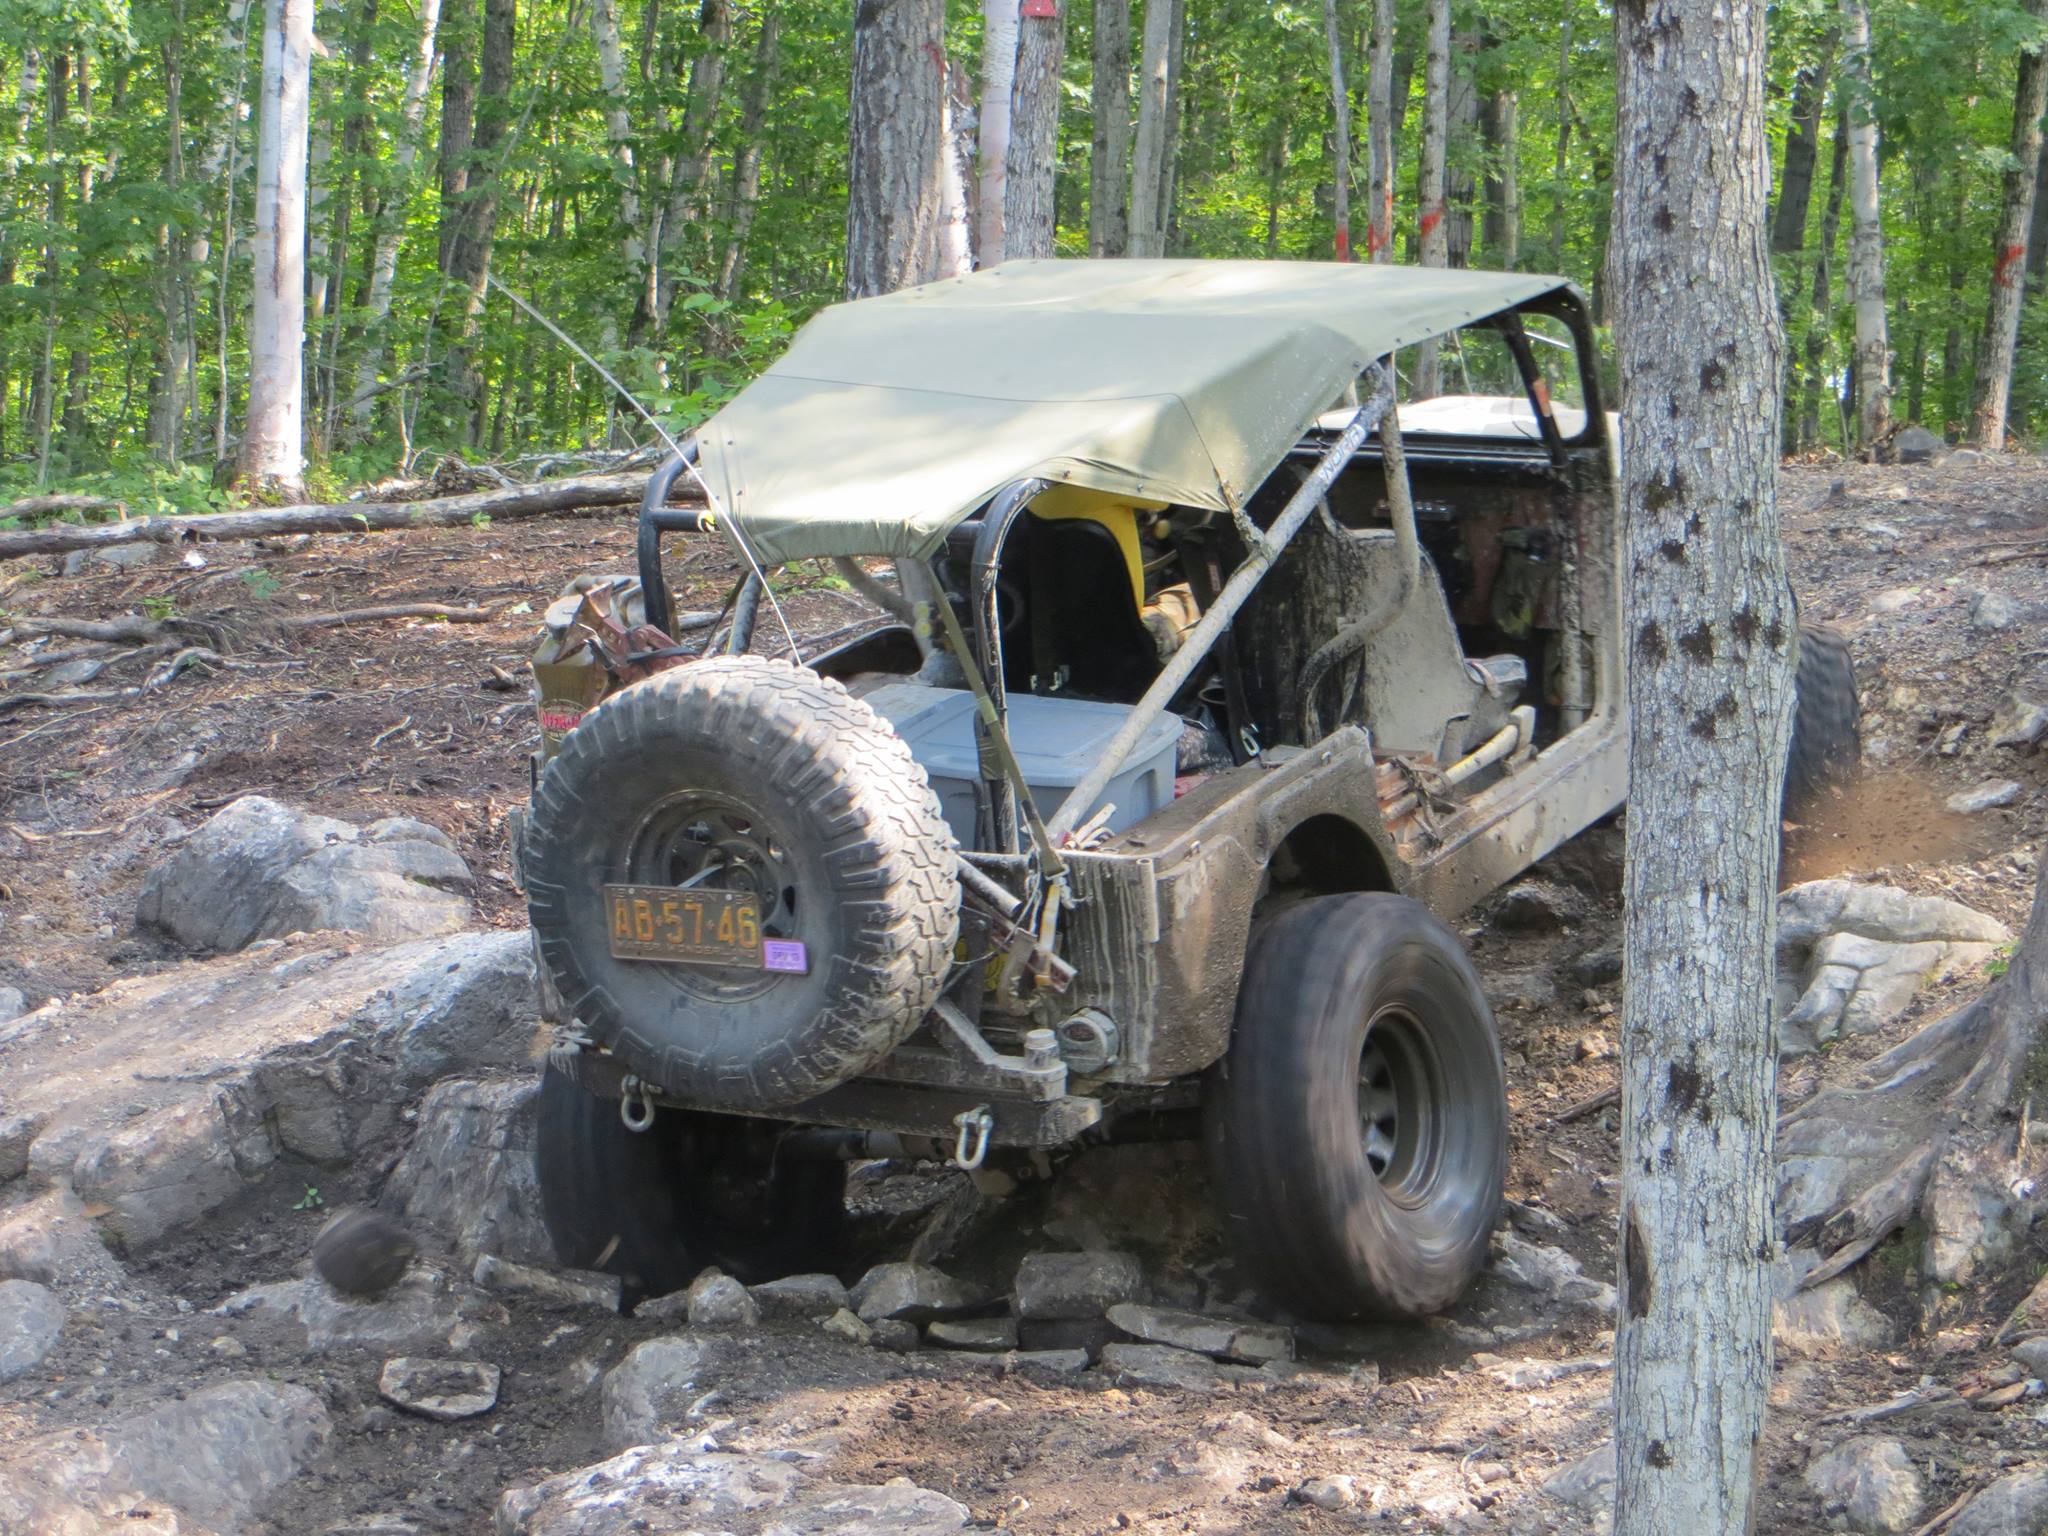   DRUMMOND ISLAND, MI HAS SOME OF THE BEST TRAILS IN THE STATE. WITH A LITTLE SOMETHING FOR EVERY TYPE OF WHEELER, DRUMMOND ISLAND IS SURE TO LEAVE ITS SPOT IN YOUR HEART!  